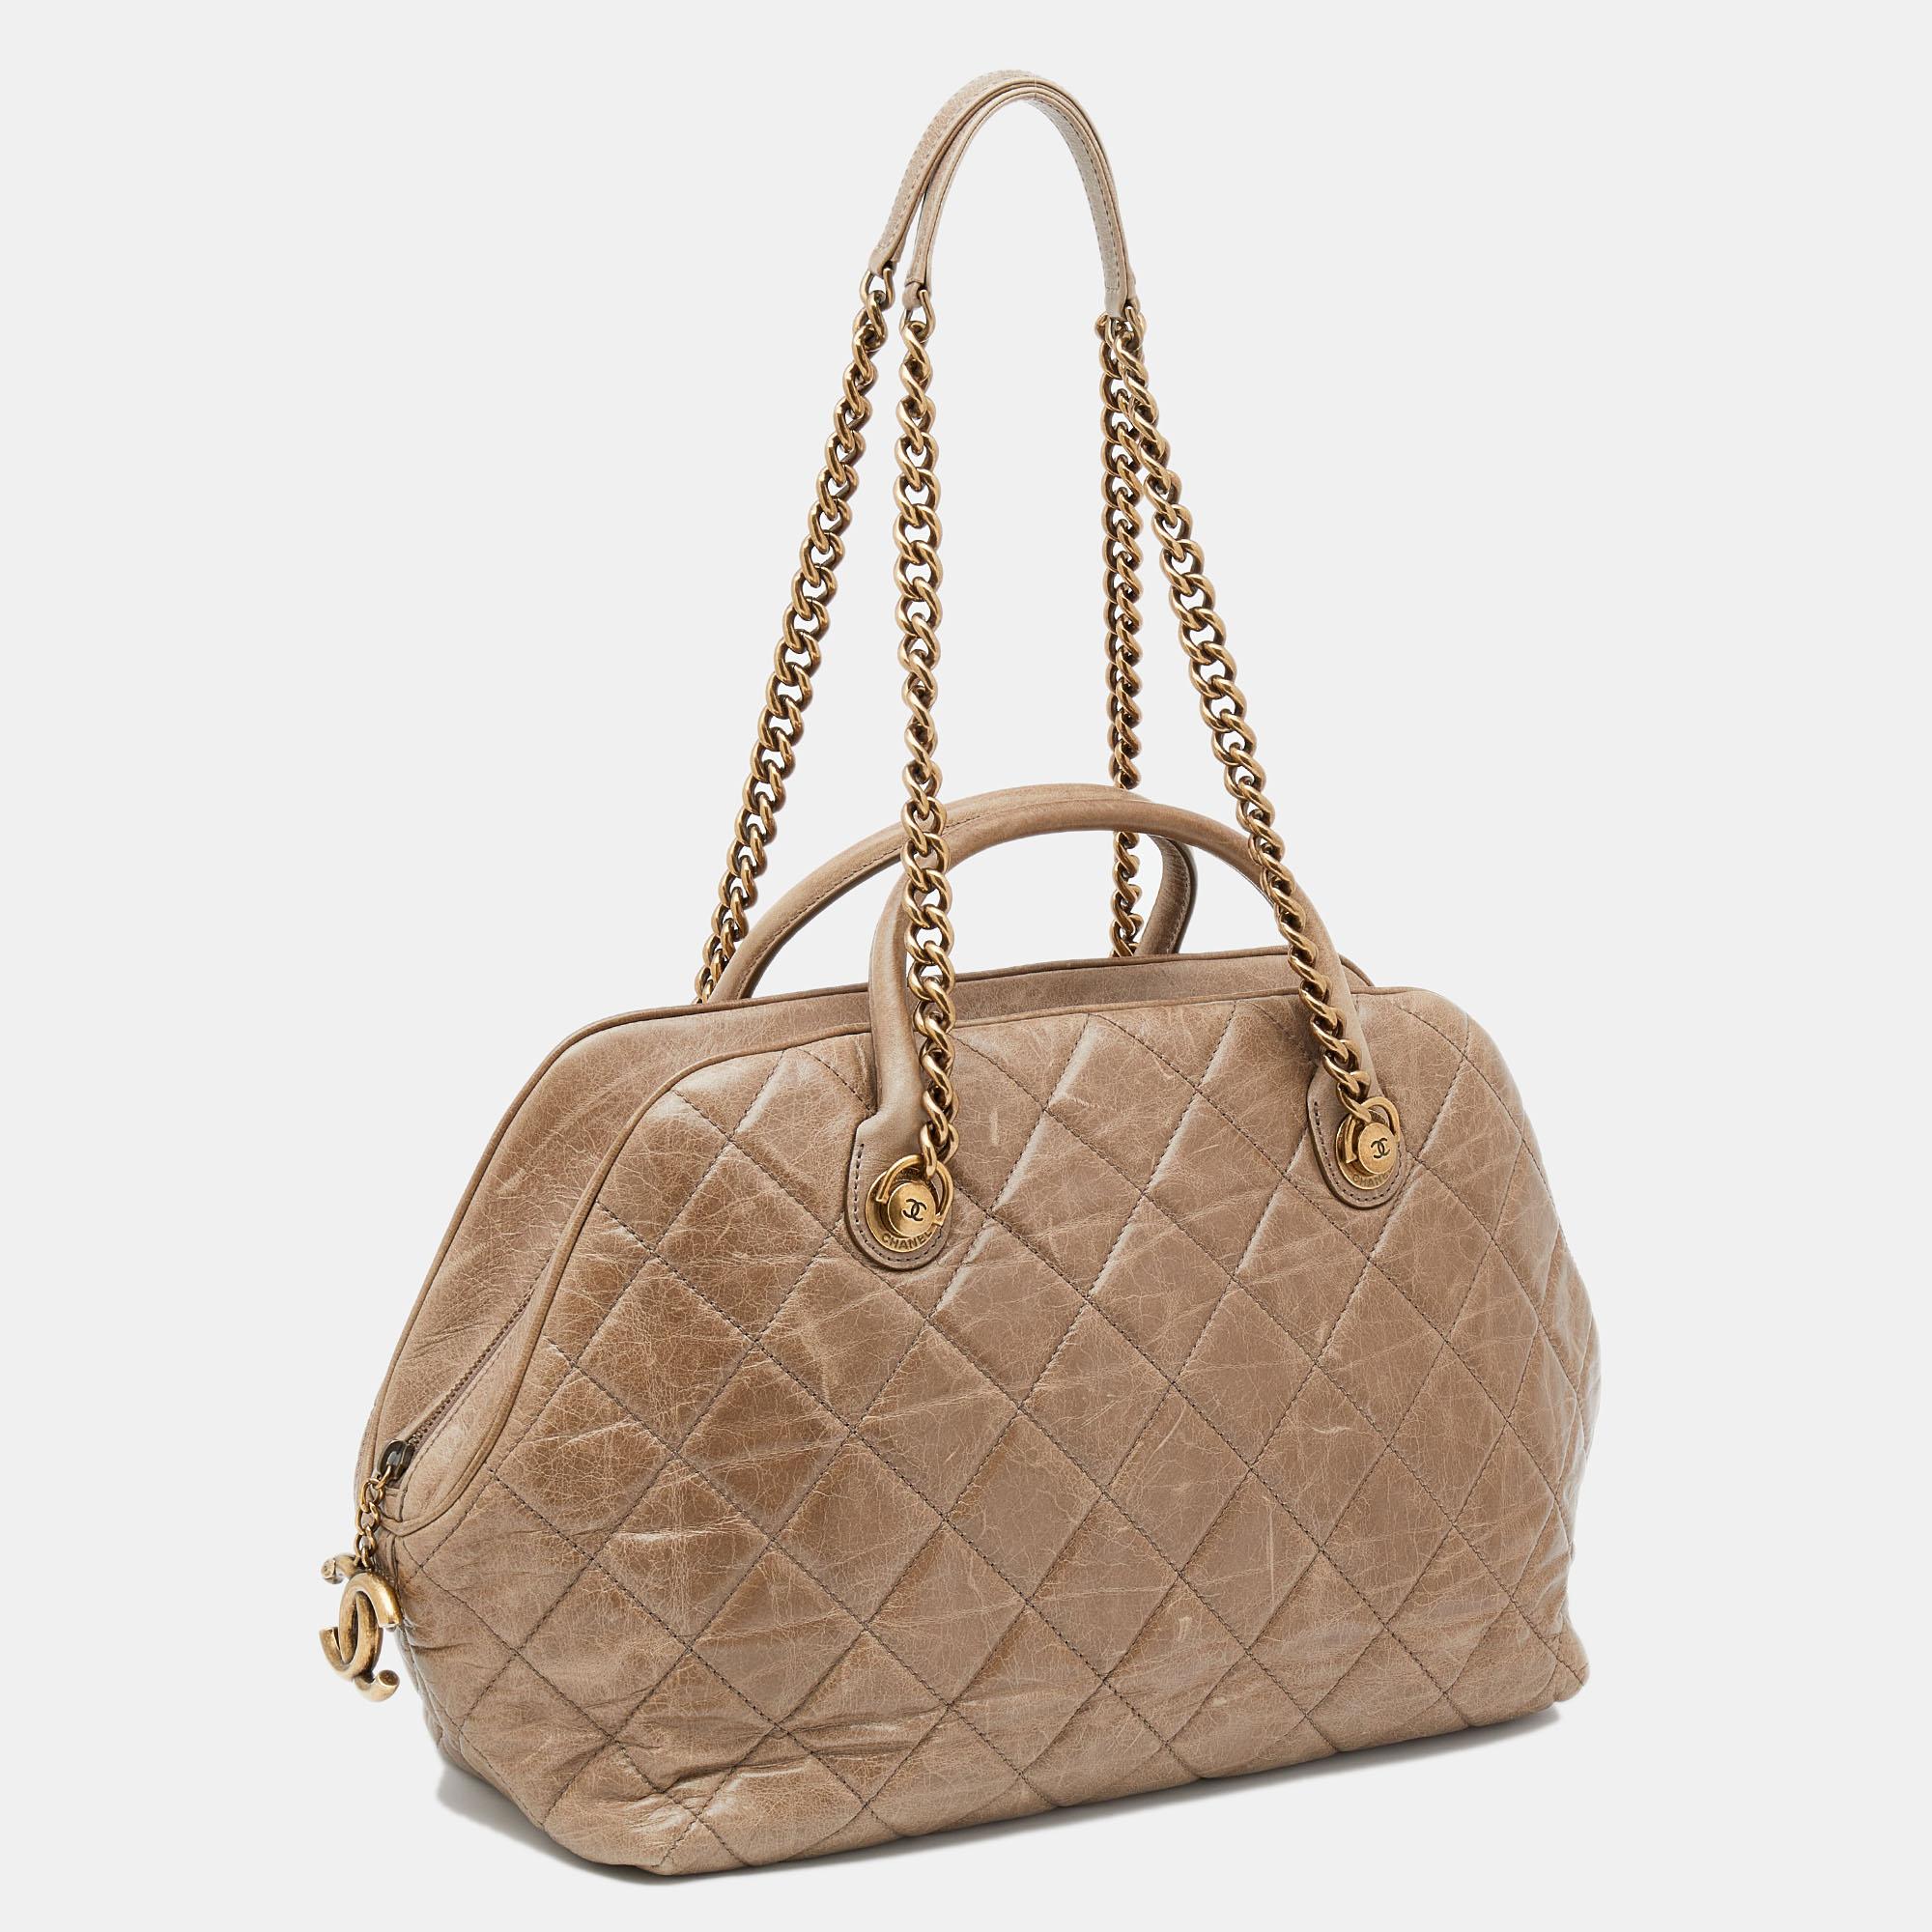 Chanel Dark Beige Quilted Leather Castle Rock Bowling Bag 3